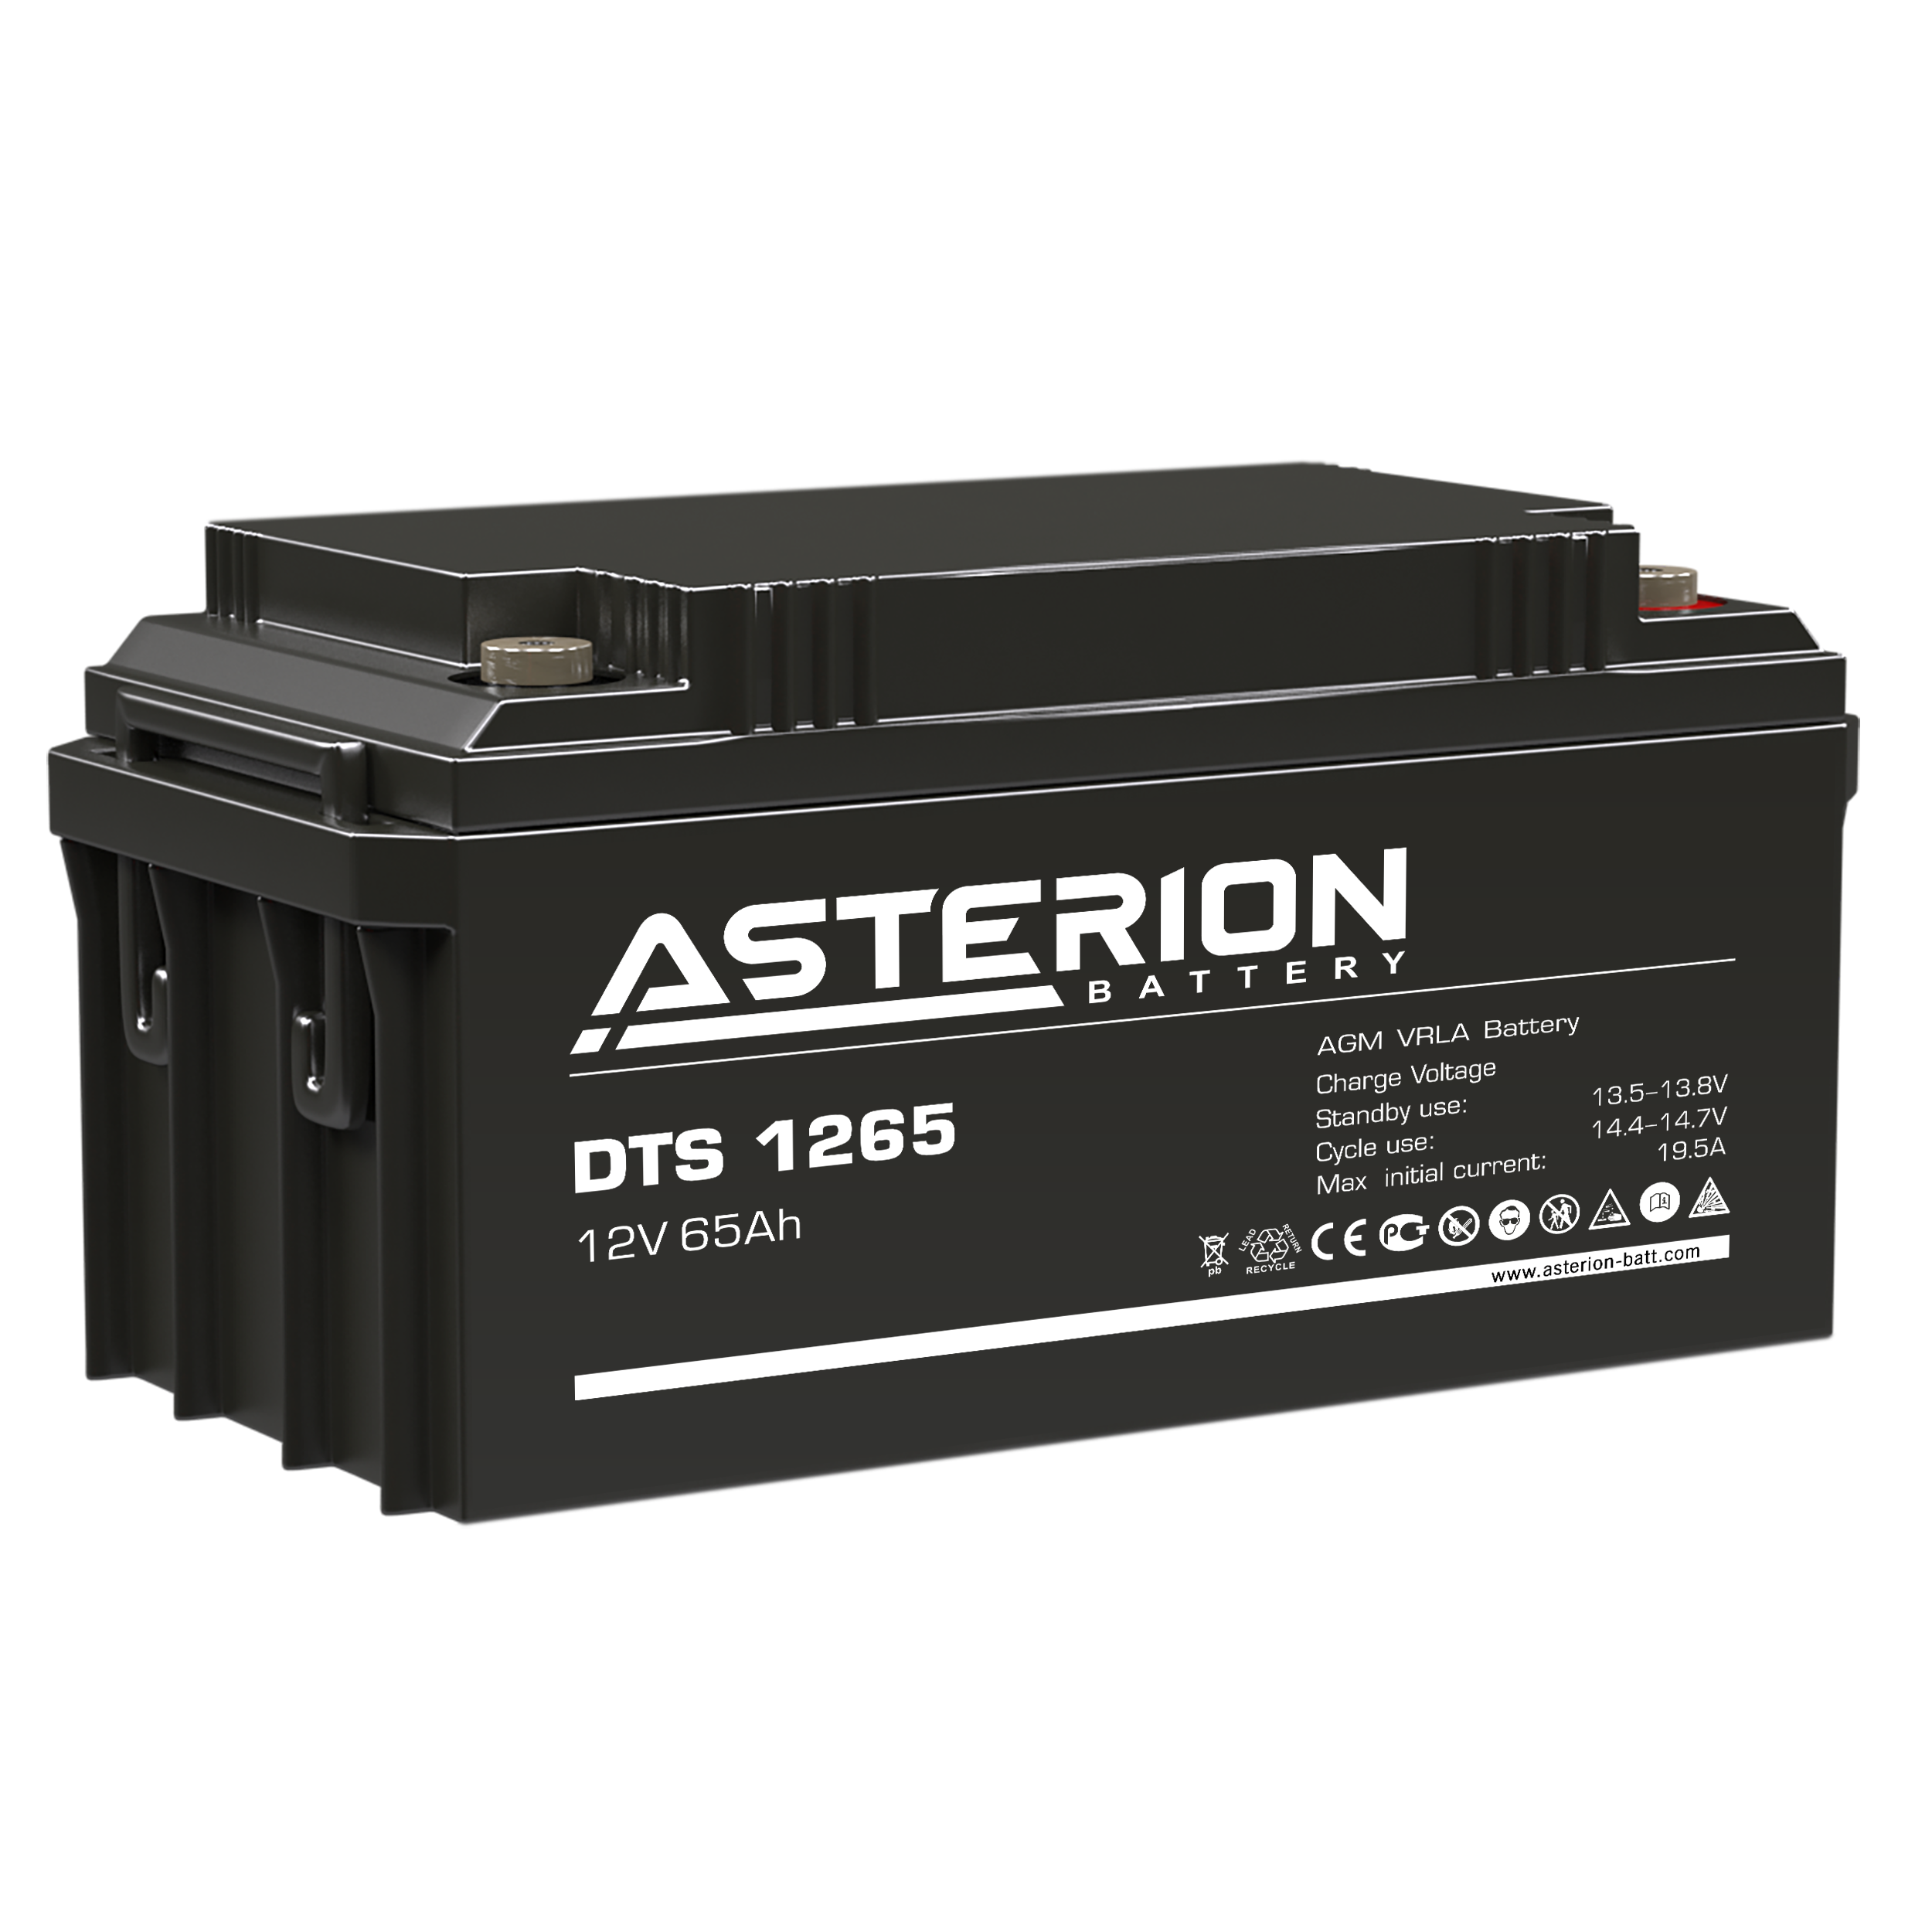 Asterion DTS 1265